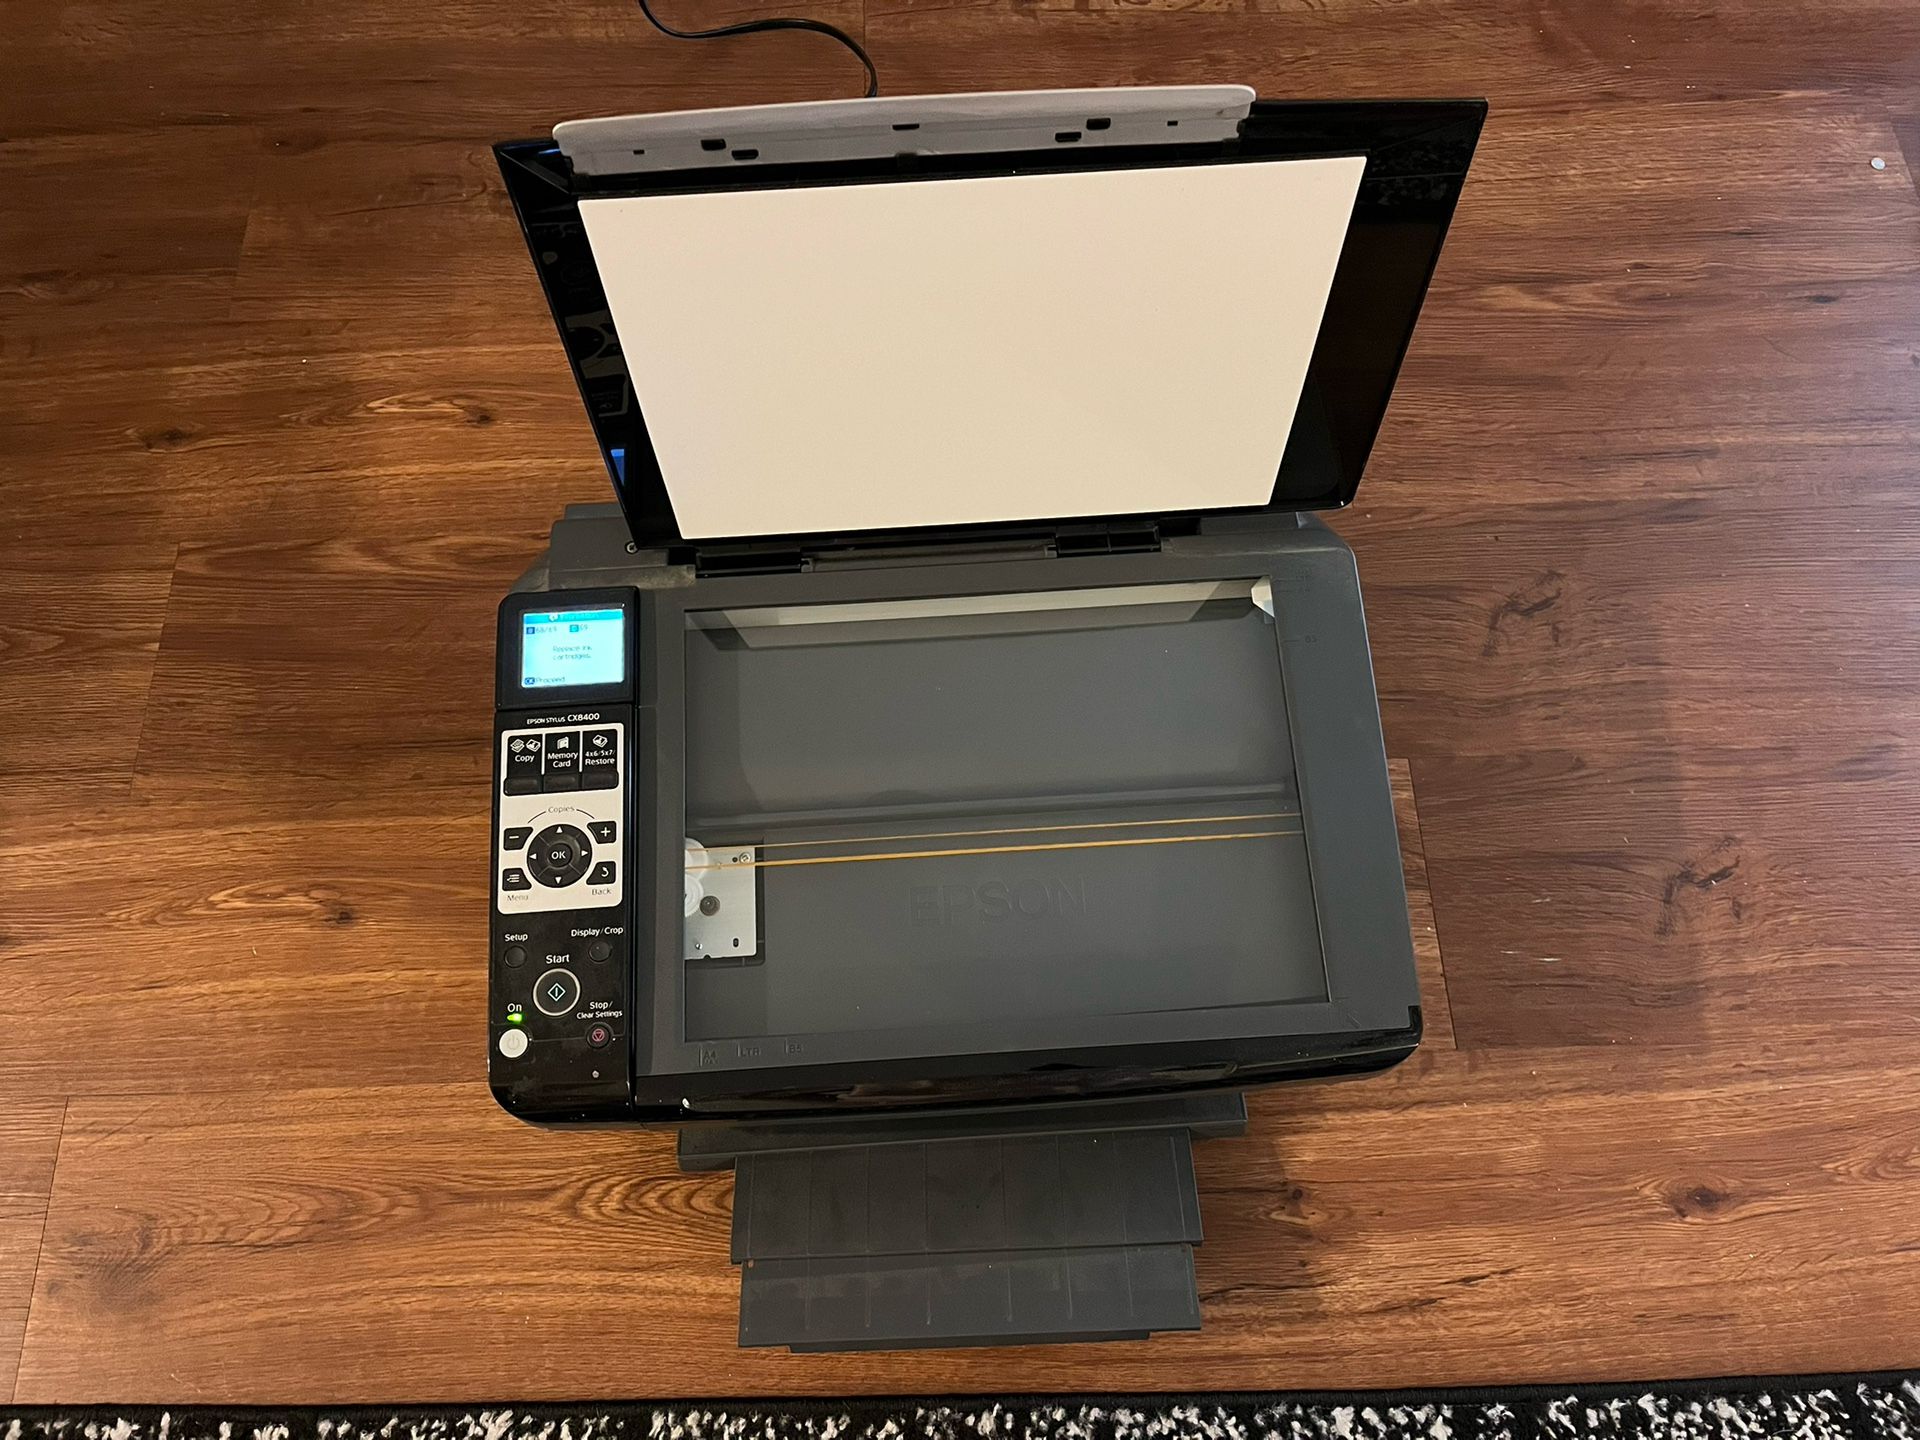 Epson Printer And Scanner 